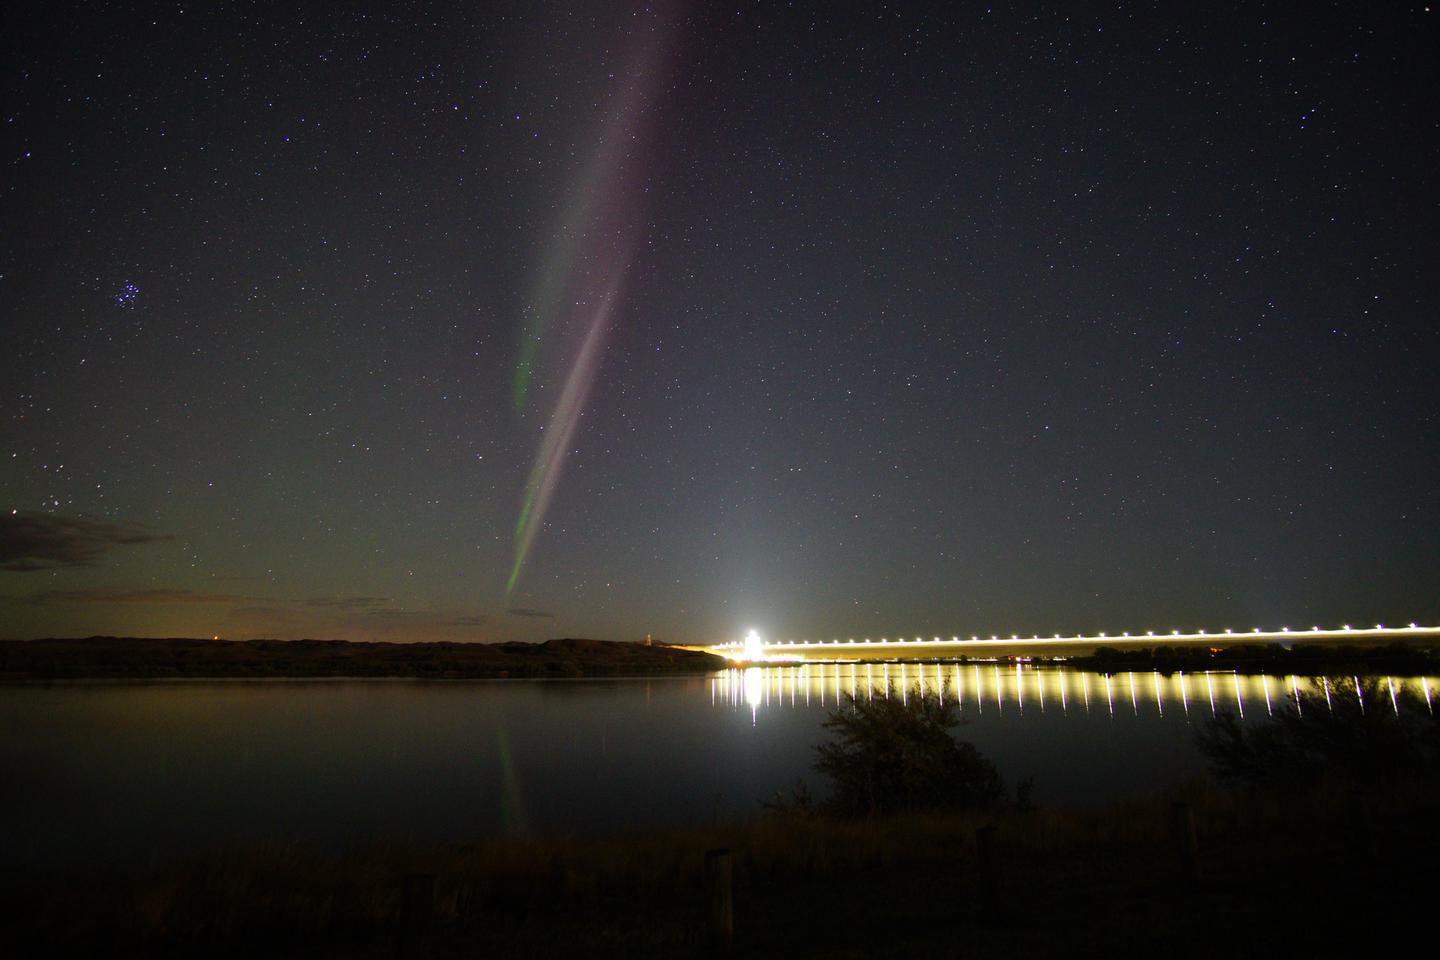 Aurora one evening over the Missouri RiverFort Peck is a great place to view the night sky, we even see the aurora!